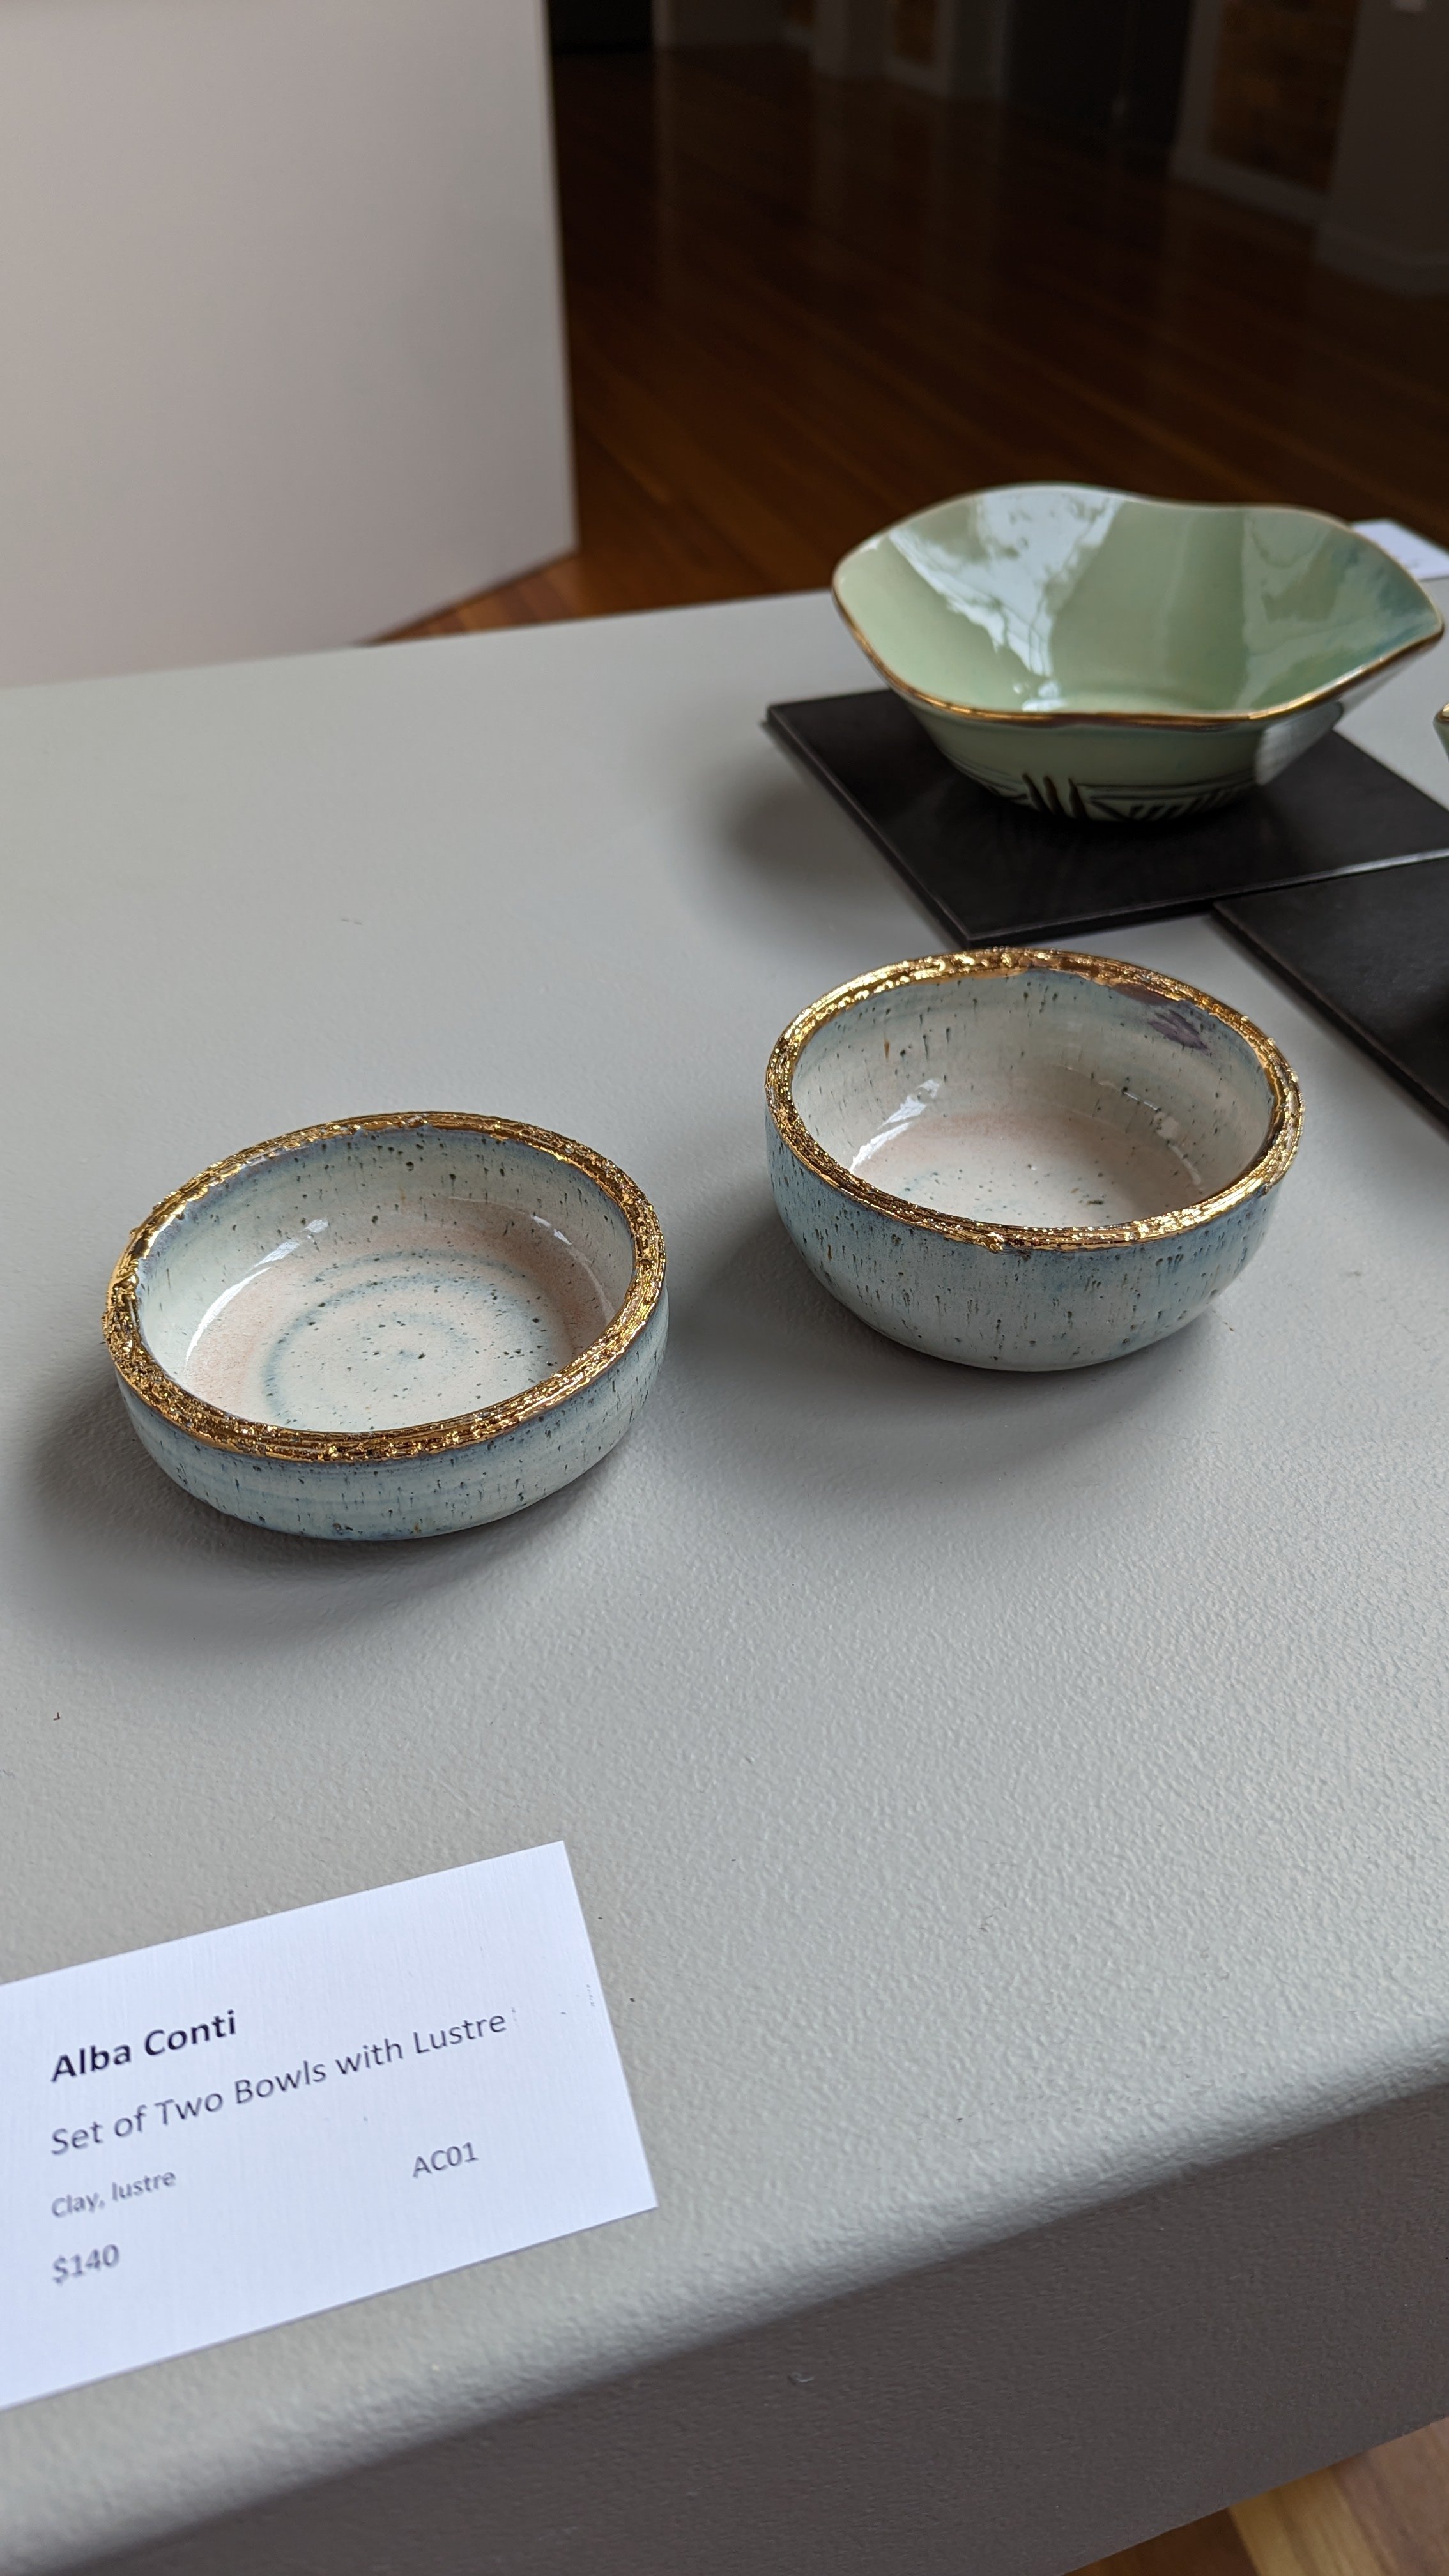 Set of Two Bowls with Lustre by Alba Conti.jpg